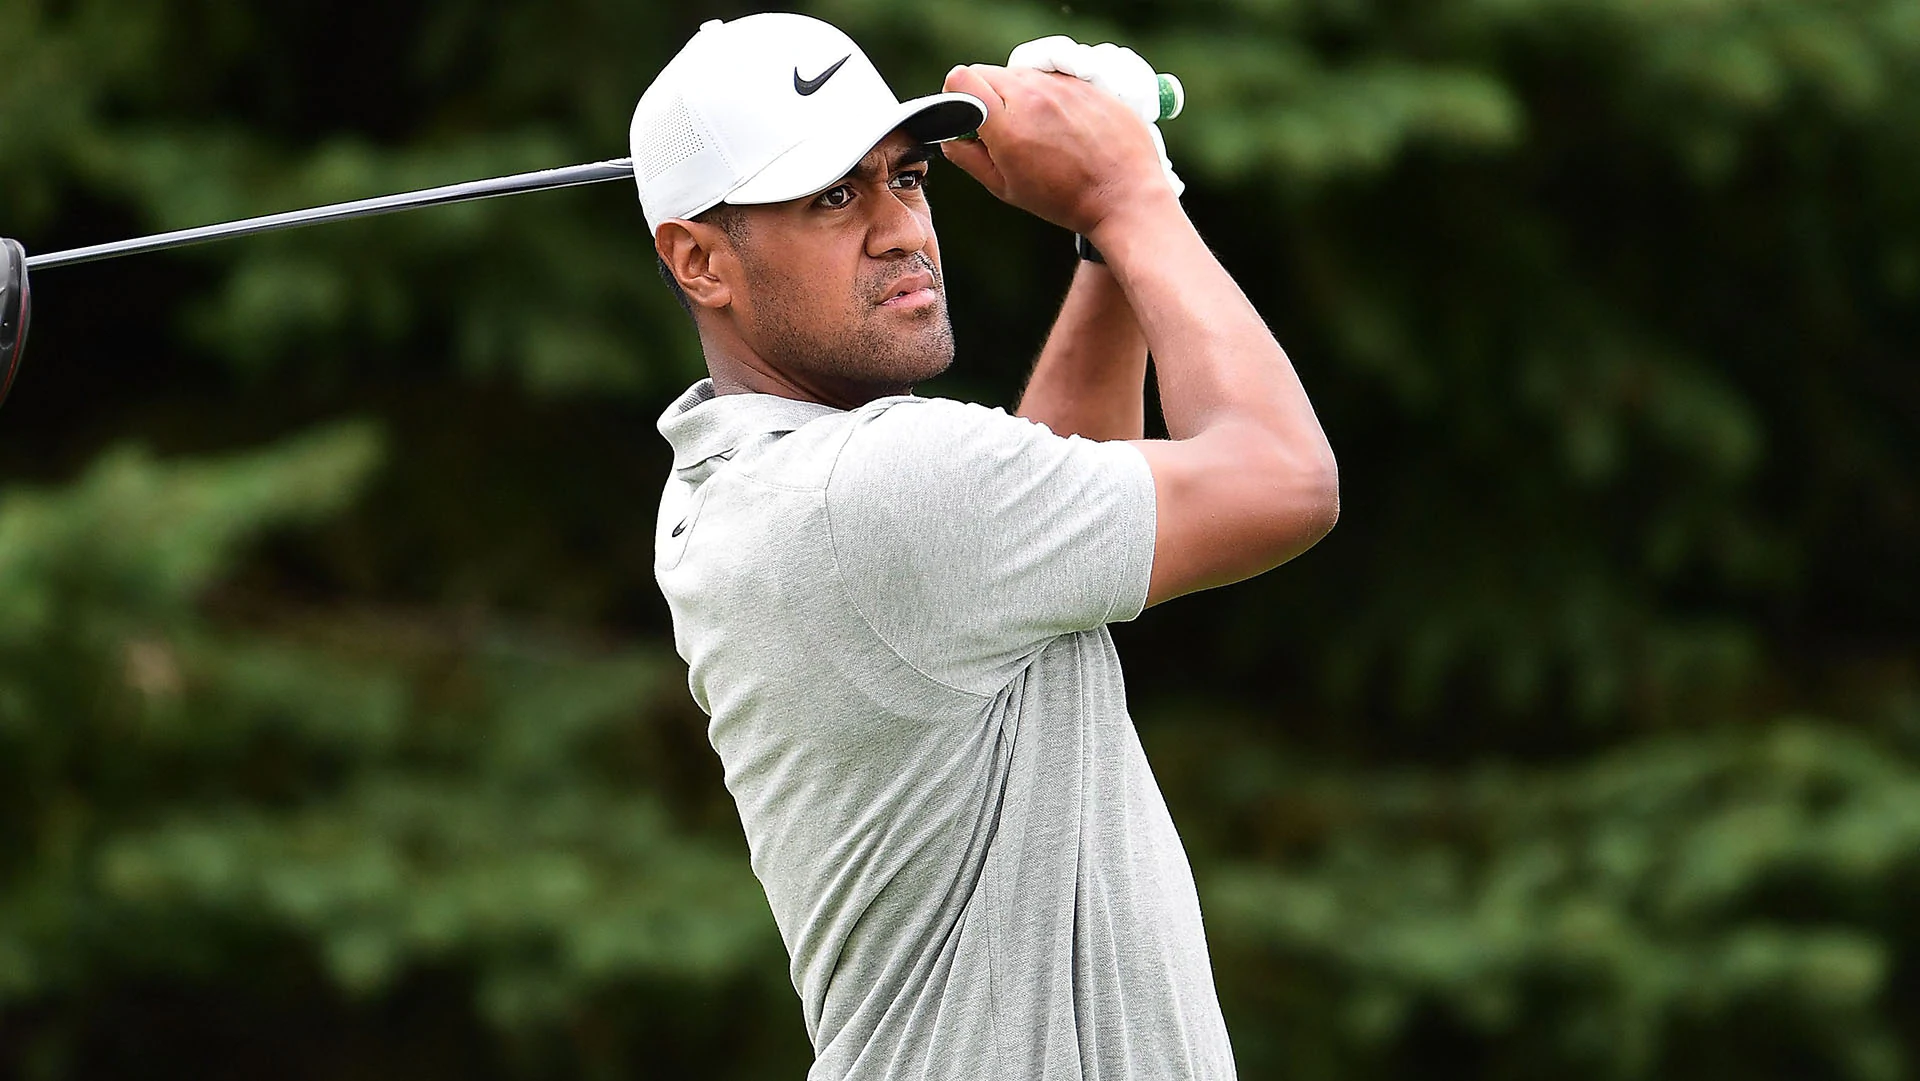 Tony Finau tabs new caddie, but not brother, for this week's WGC event in Memphis 2